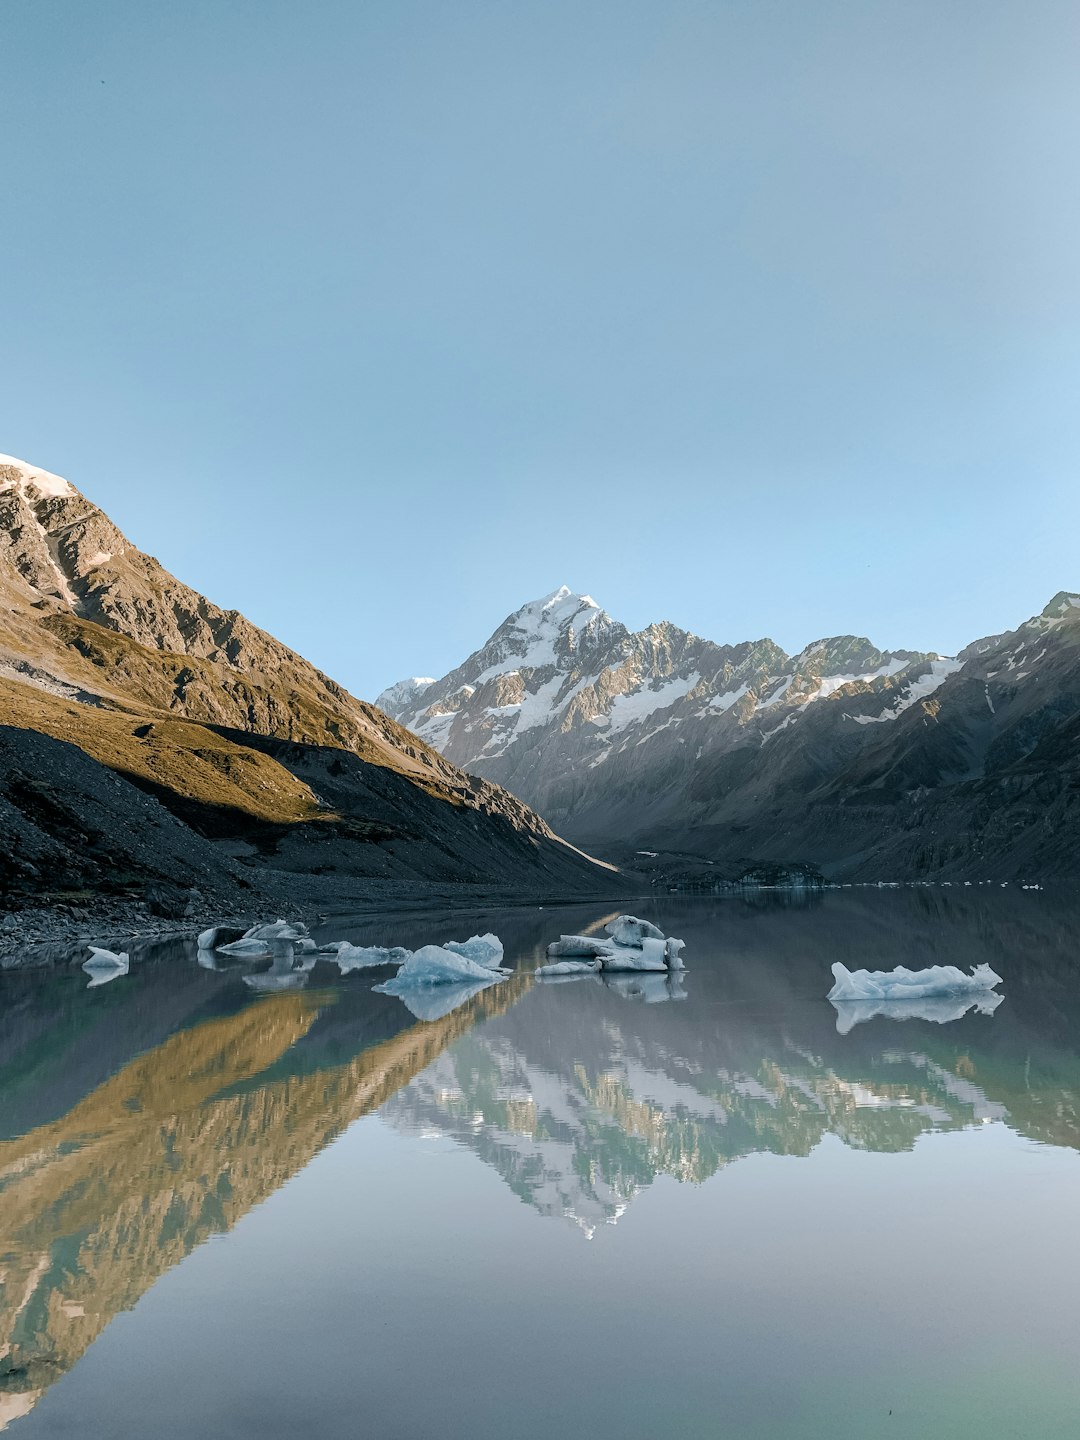 Travel Tips and Stories of Mt Cook in New Zealand